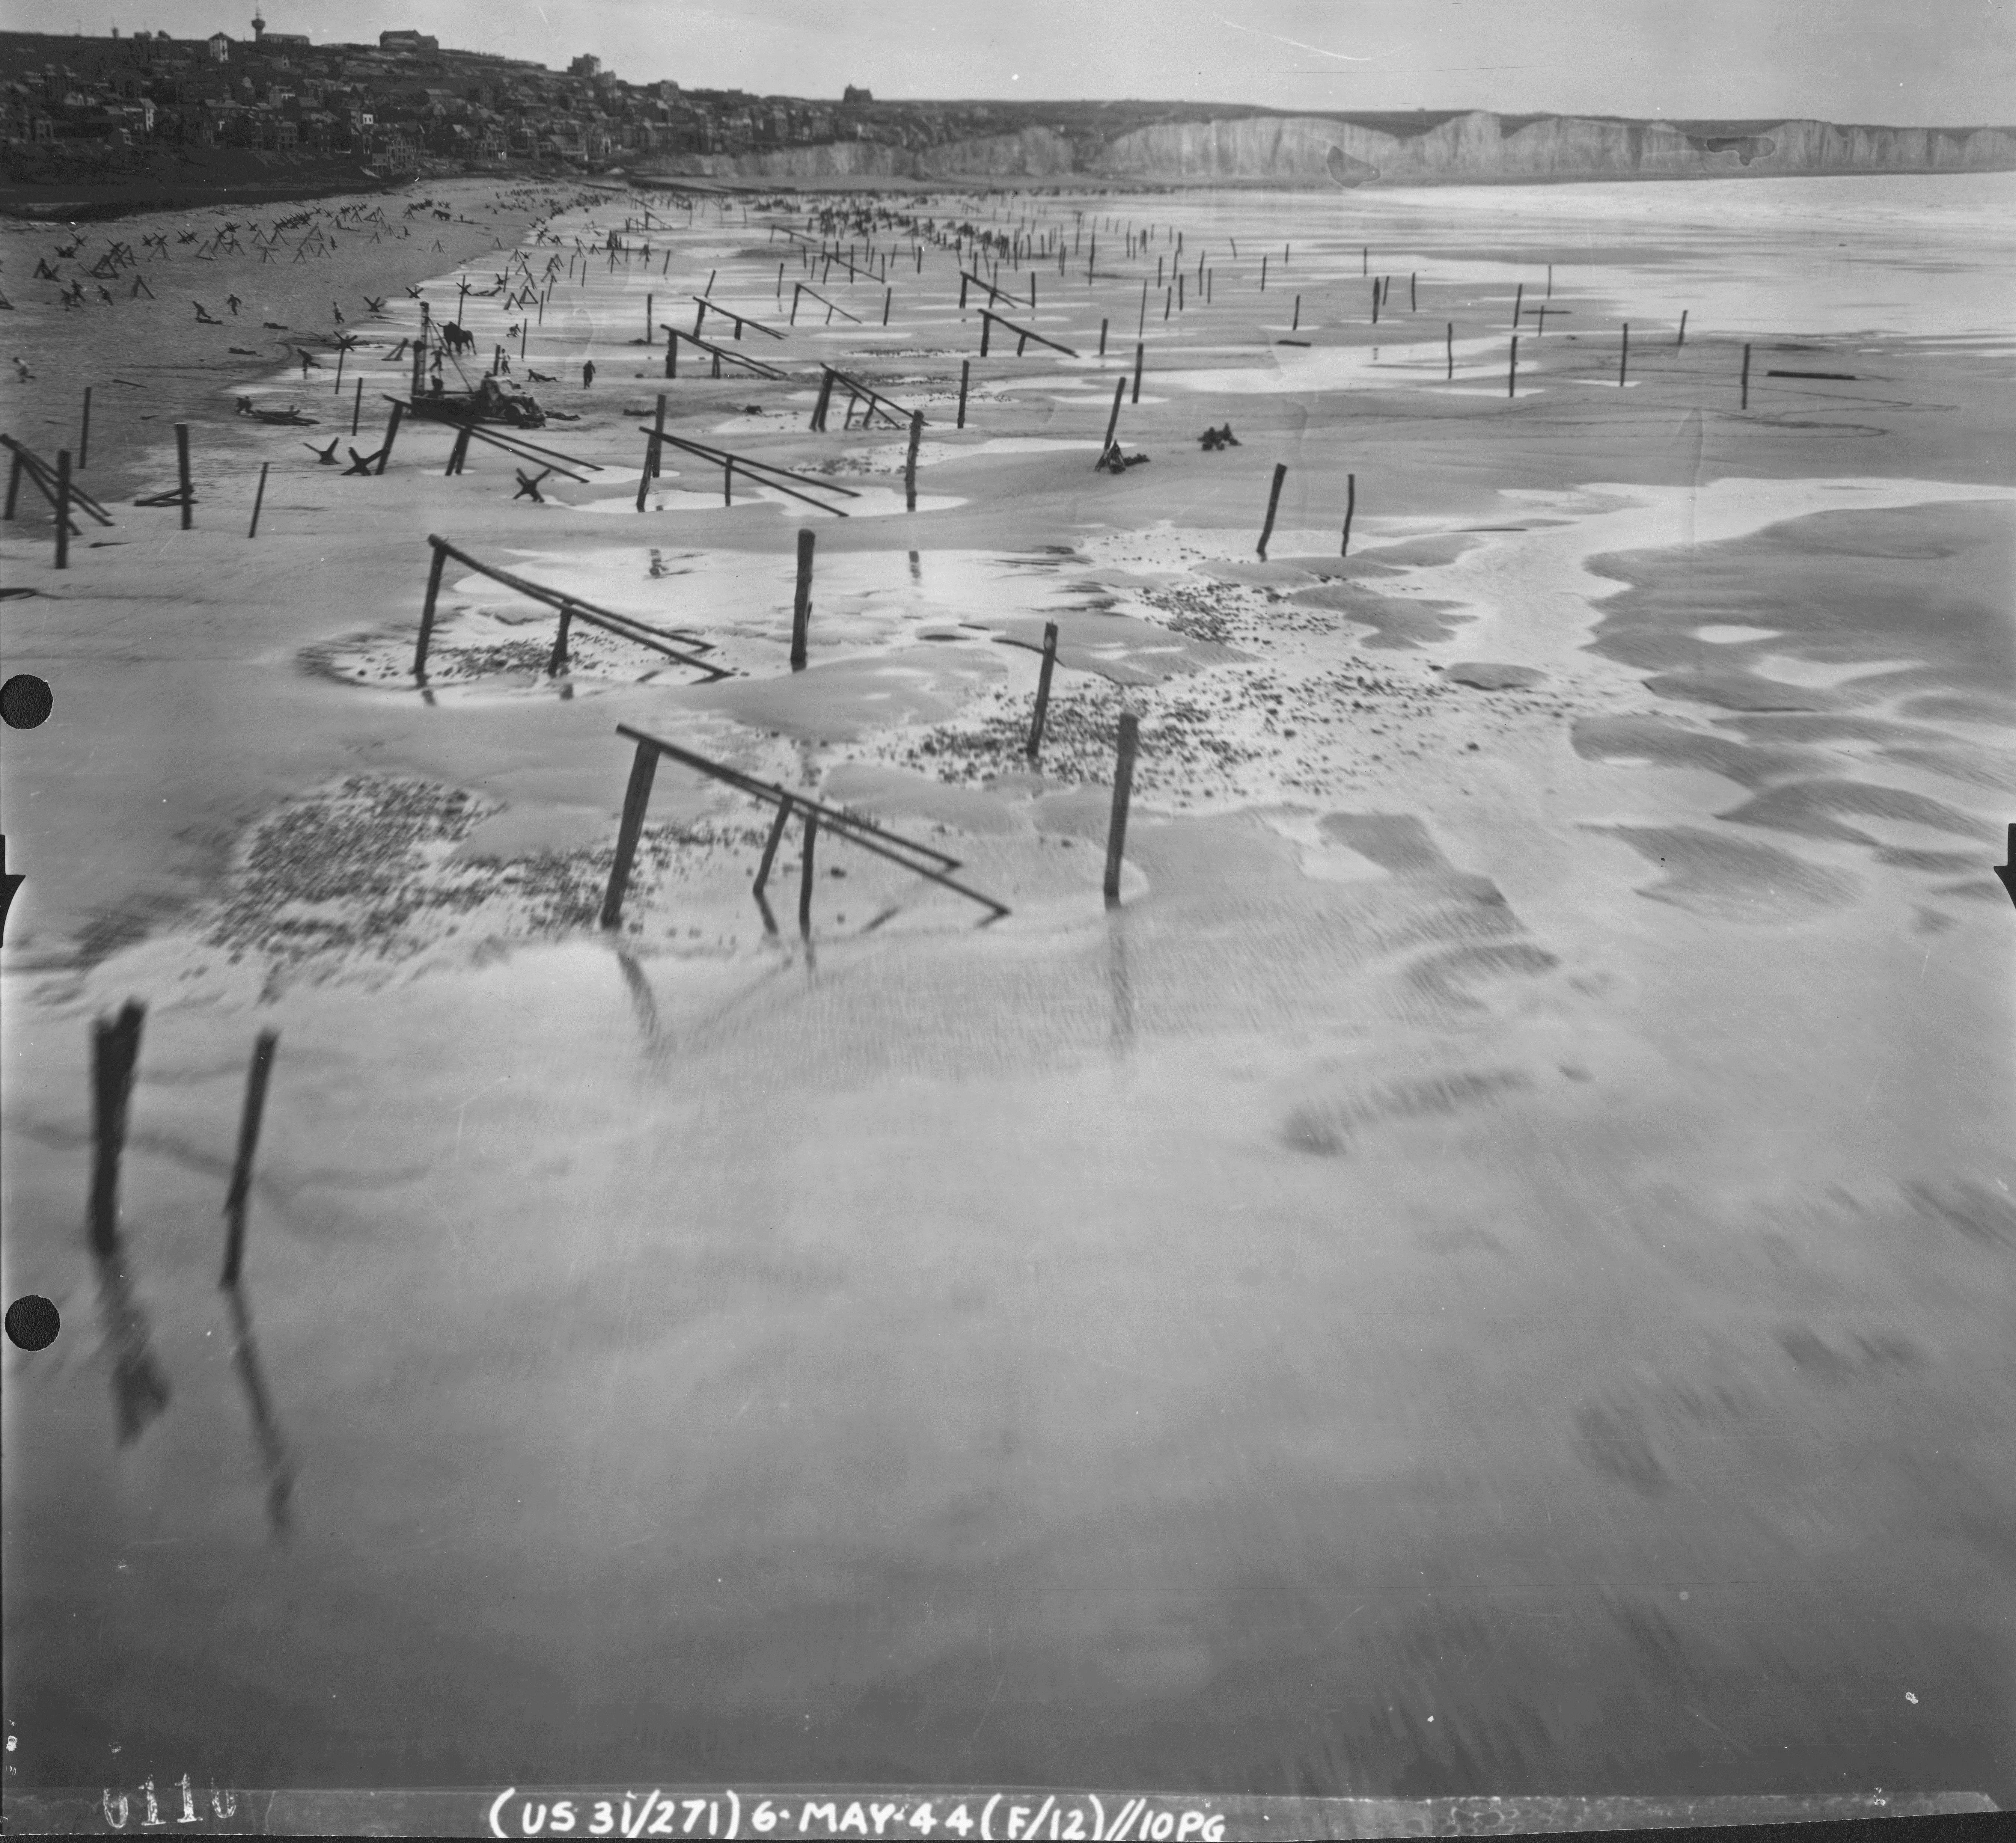 Normandy beach defenses, France, 6 May 1944, photo 1 of 4